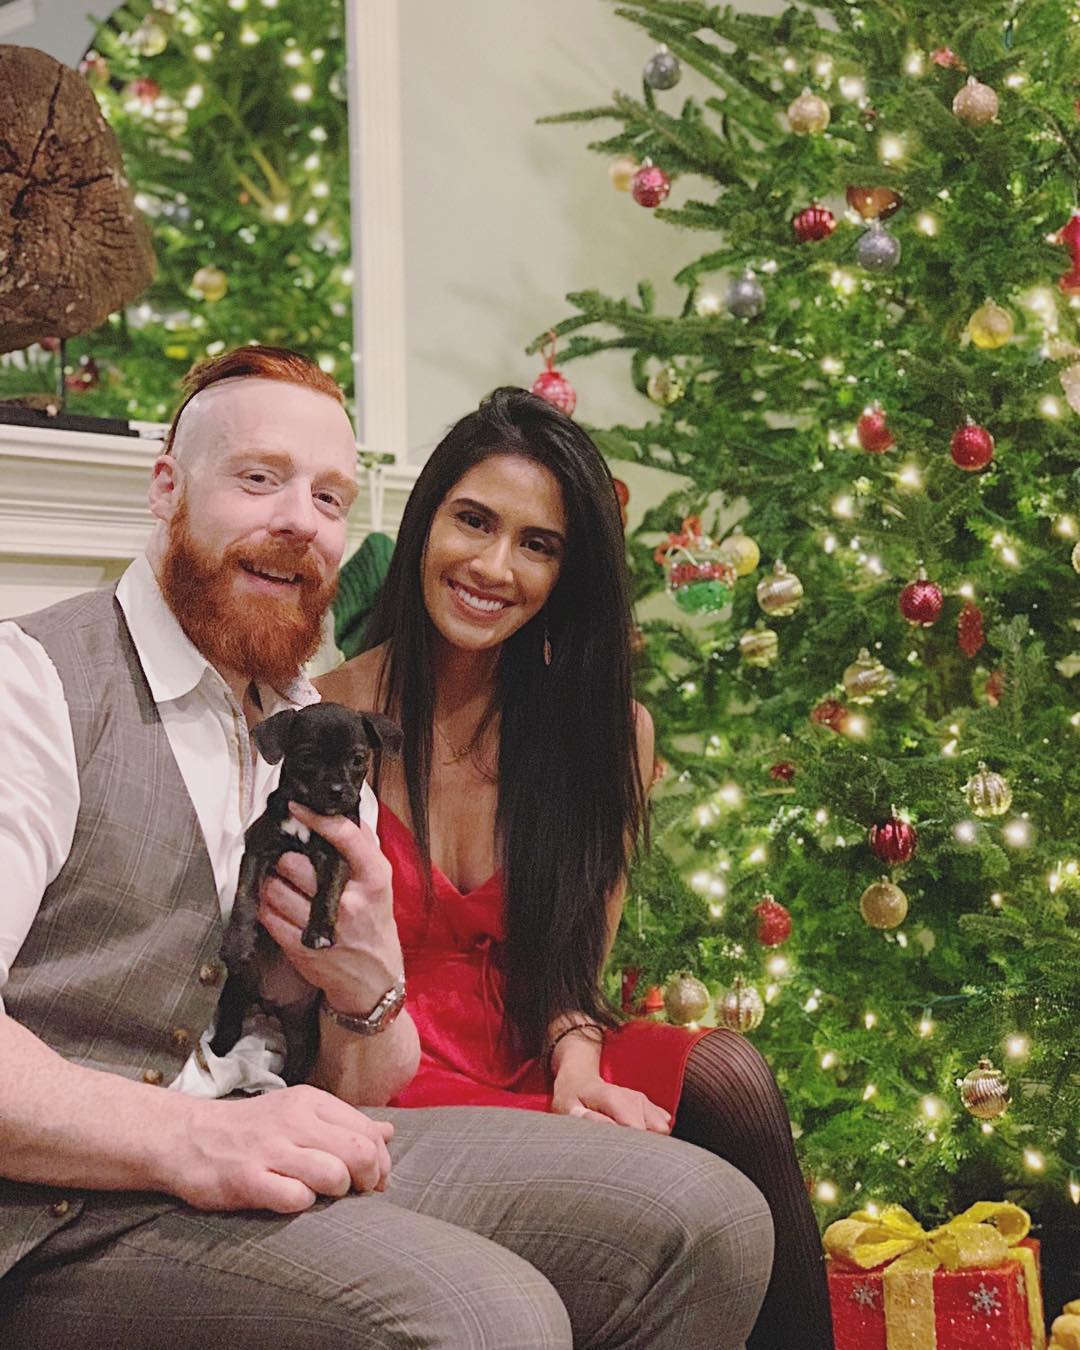 Sheamus Celebrates Christmas with His Girlfriend